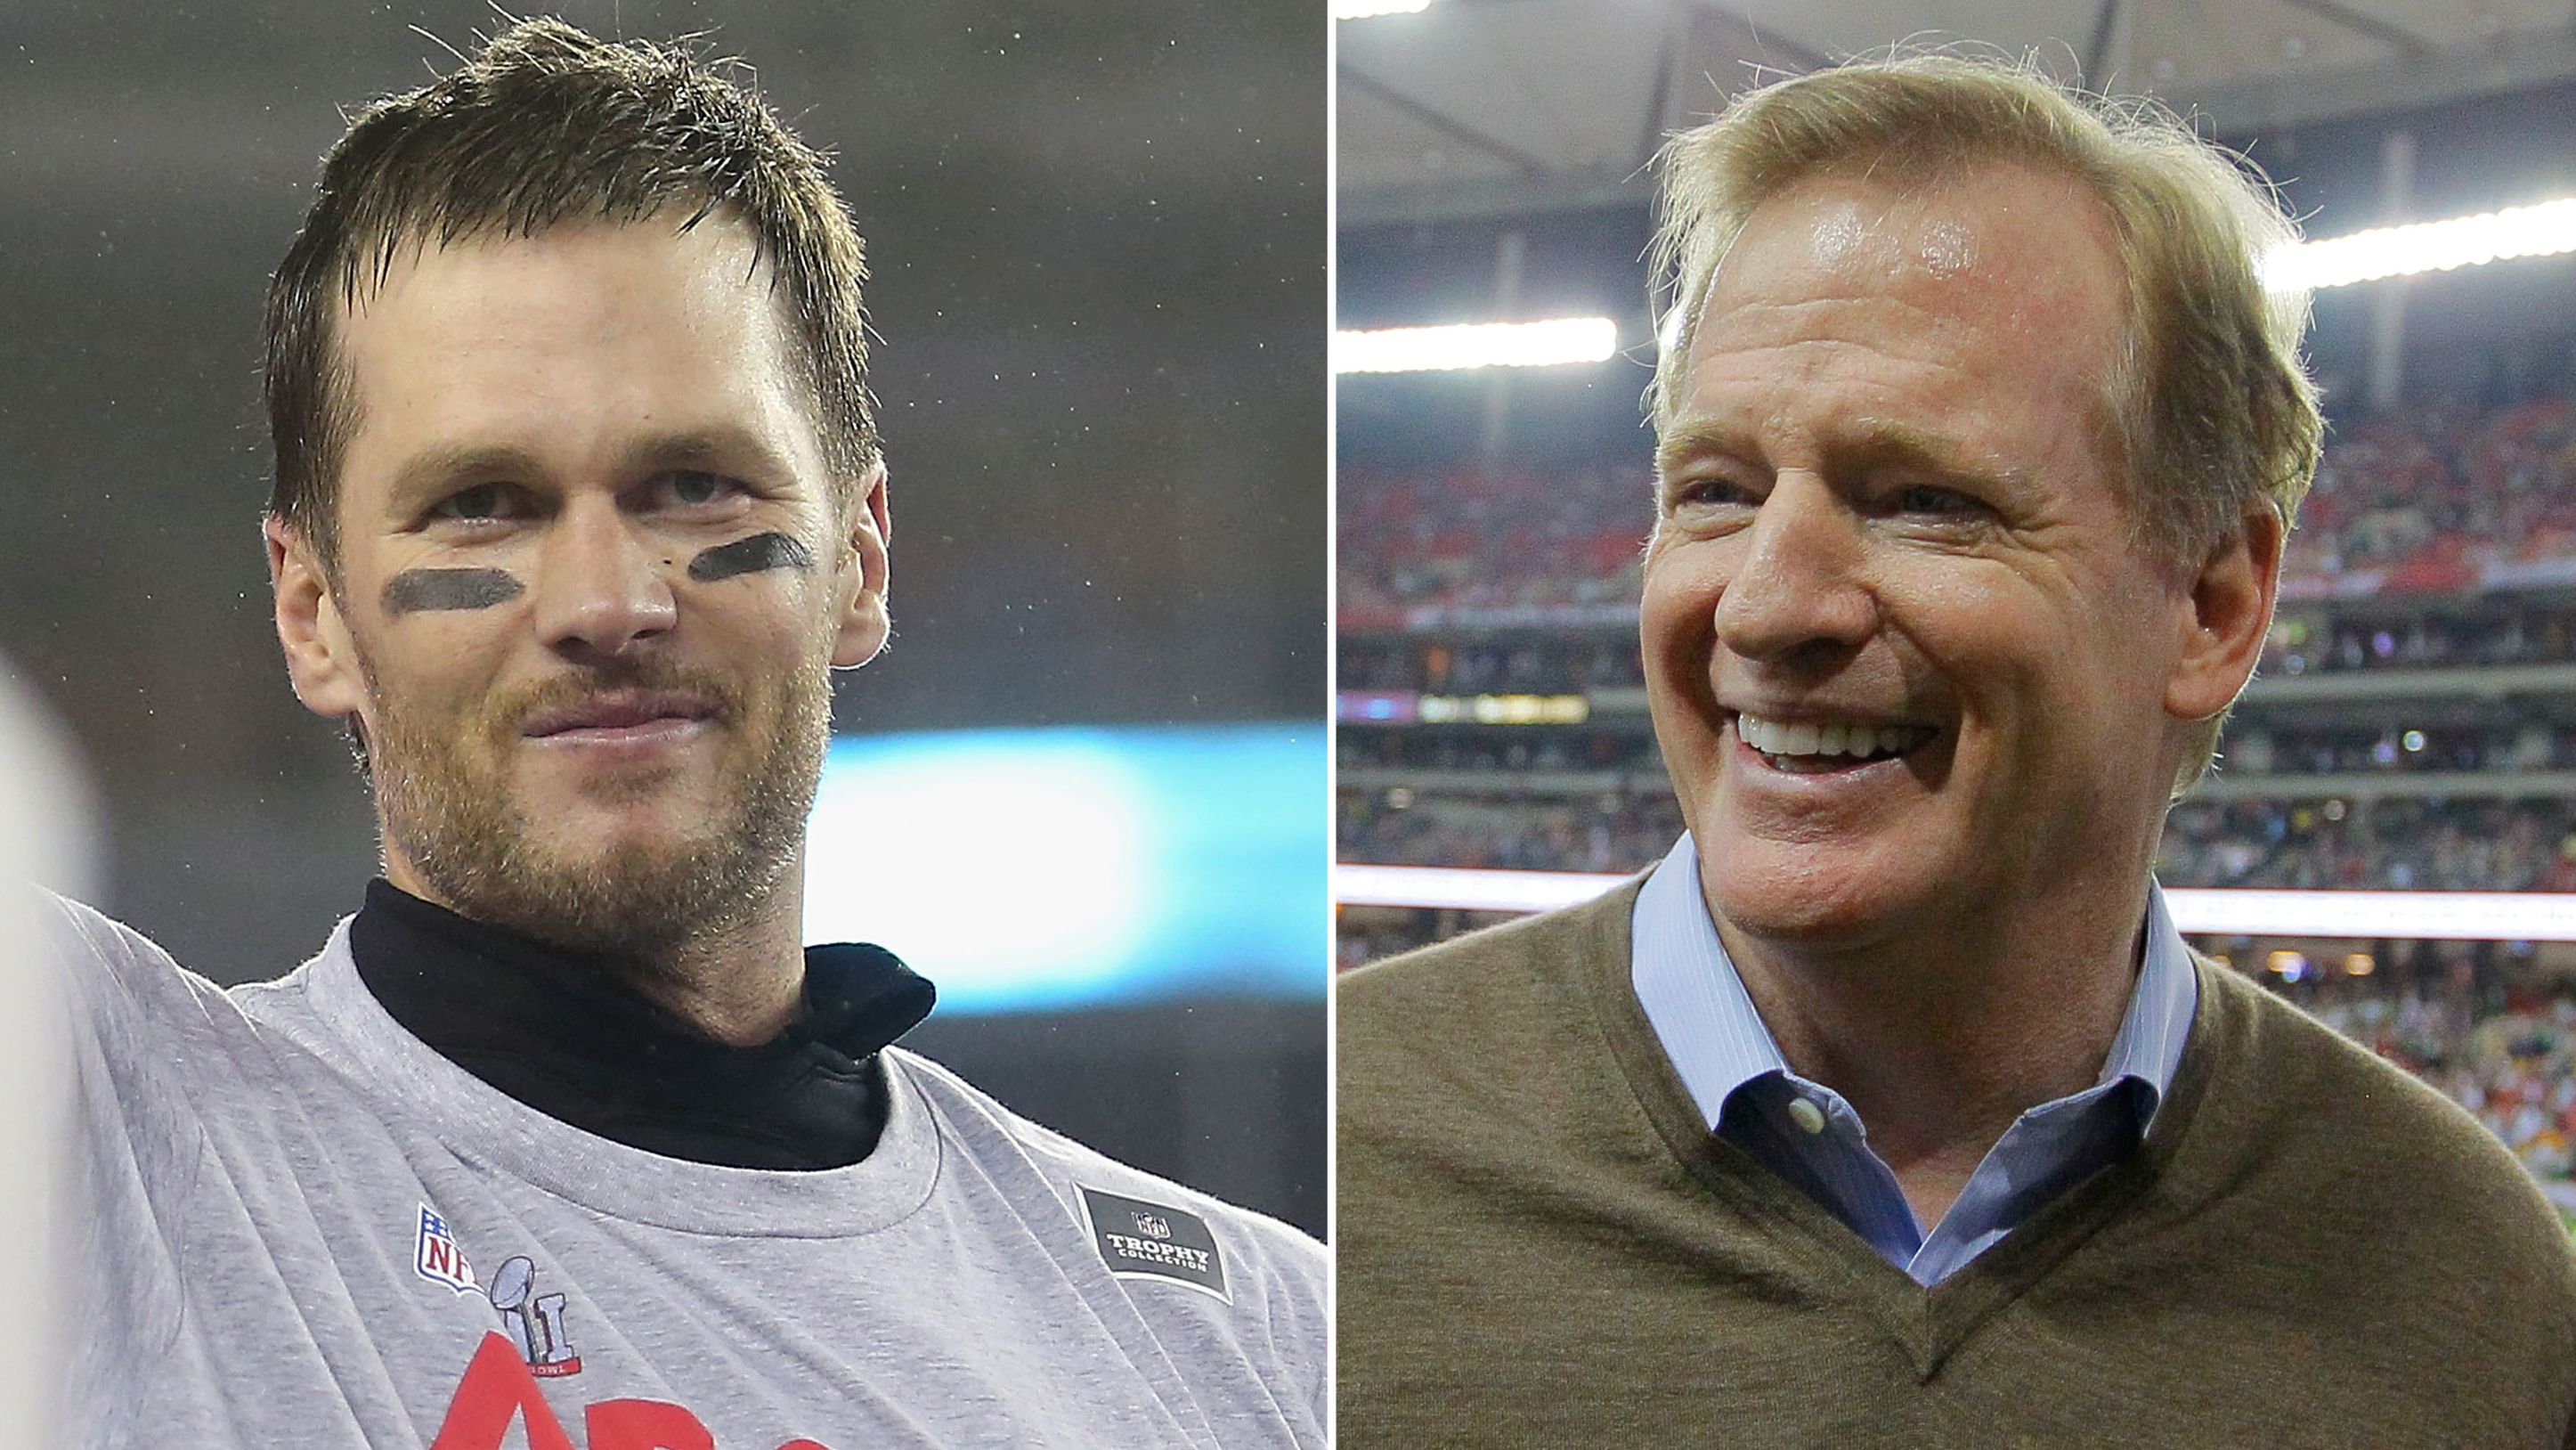 After a long Deflategate legal battle, Tom Brady (left) served his four-game suspension that was imposed by Roger Goodell (right) at the start of this season.